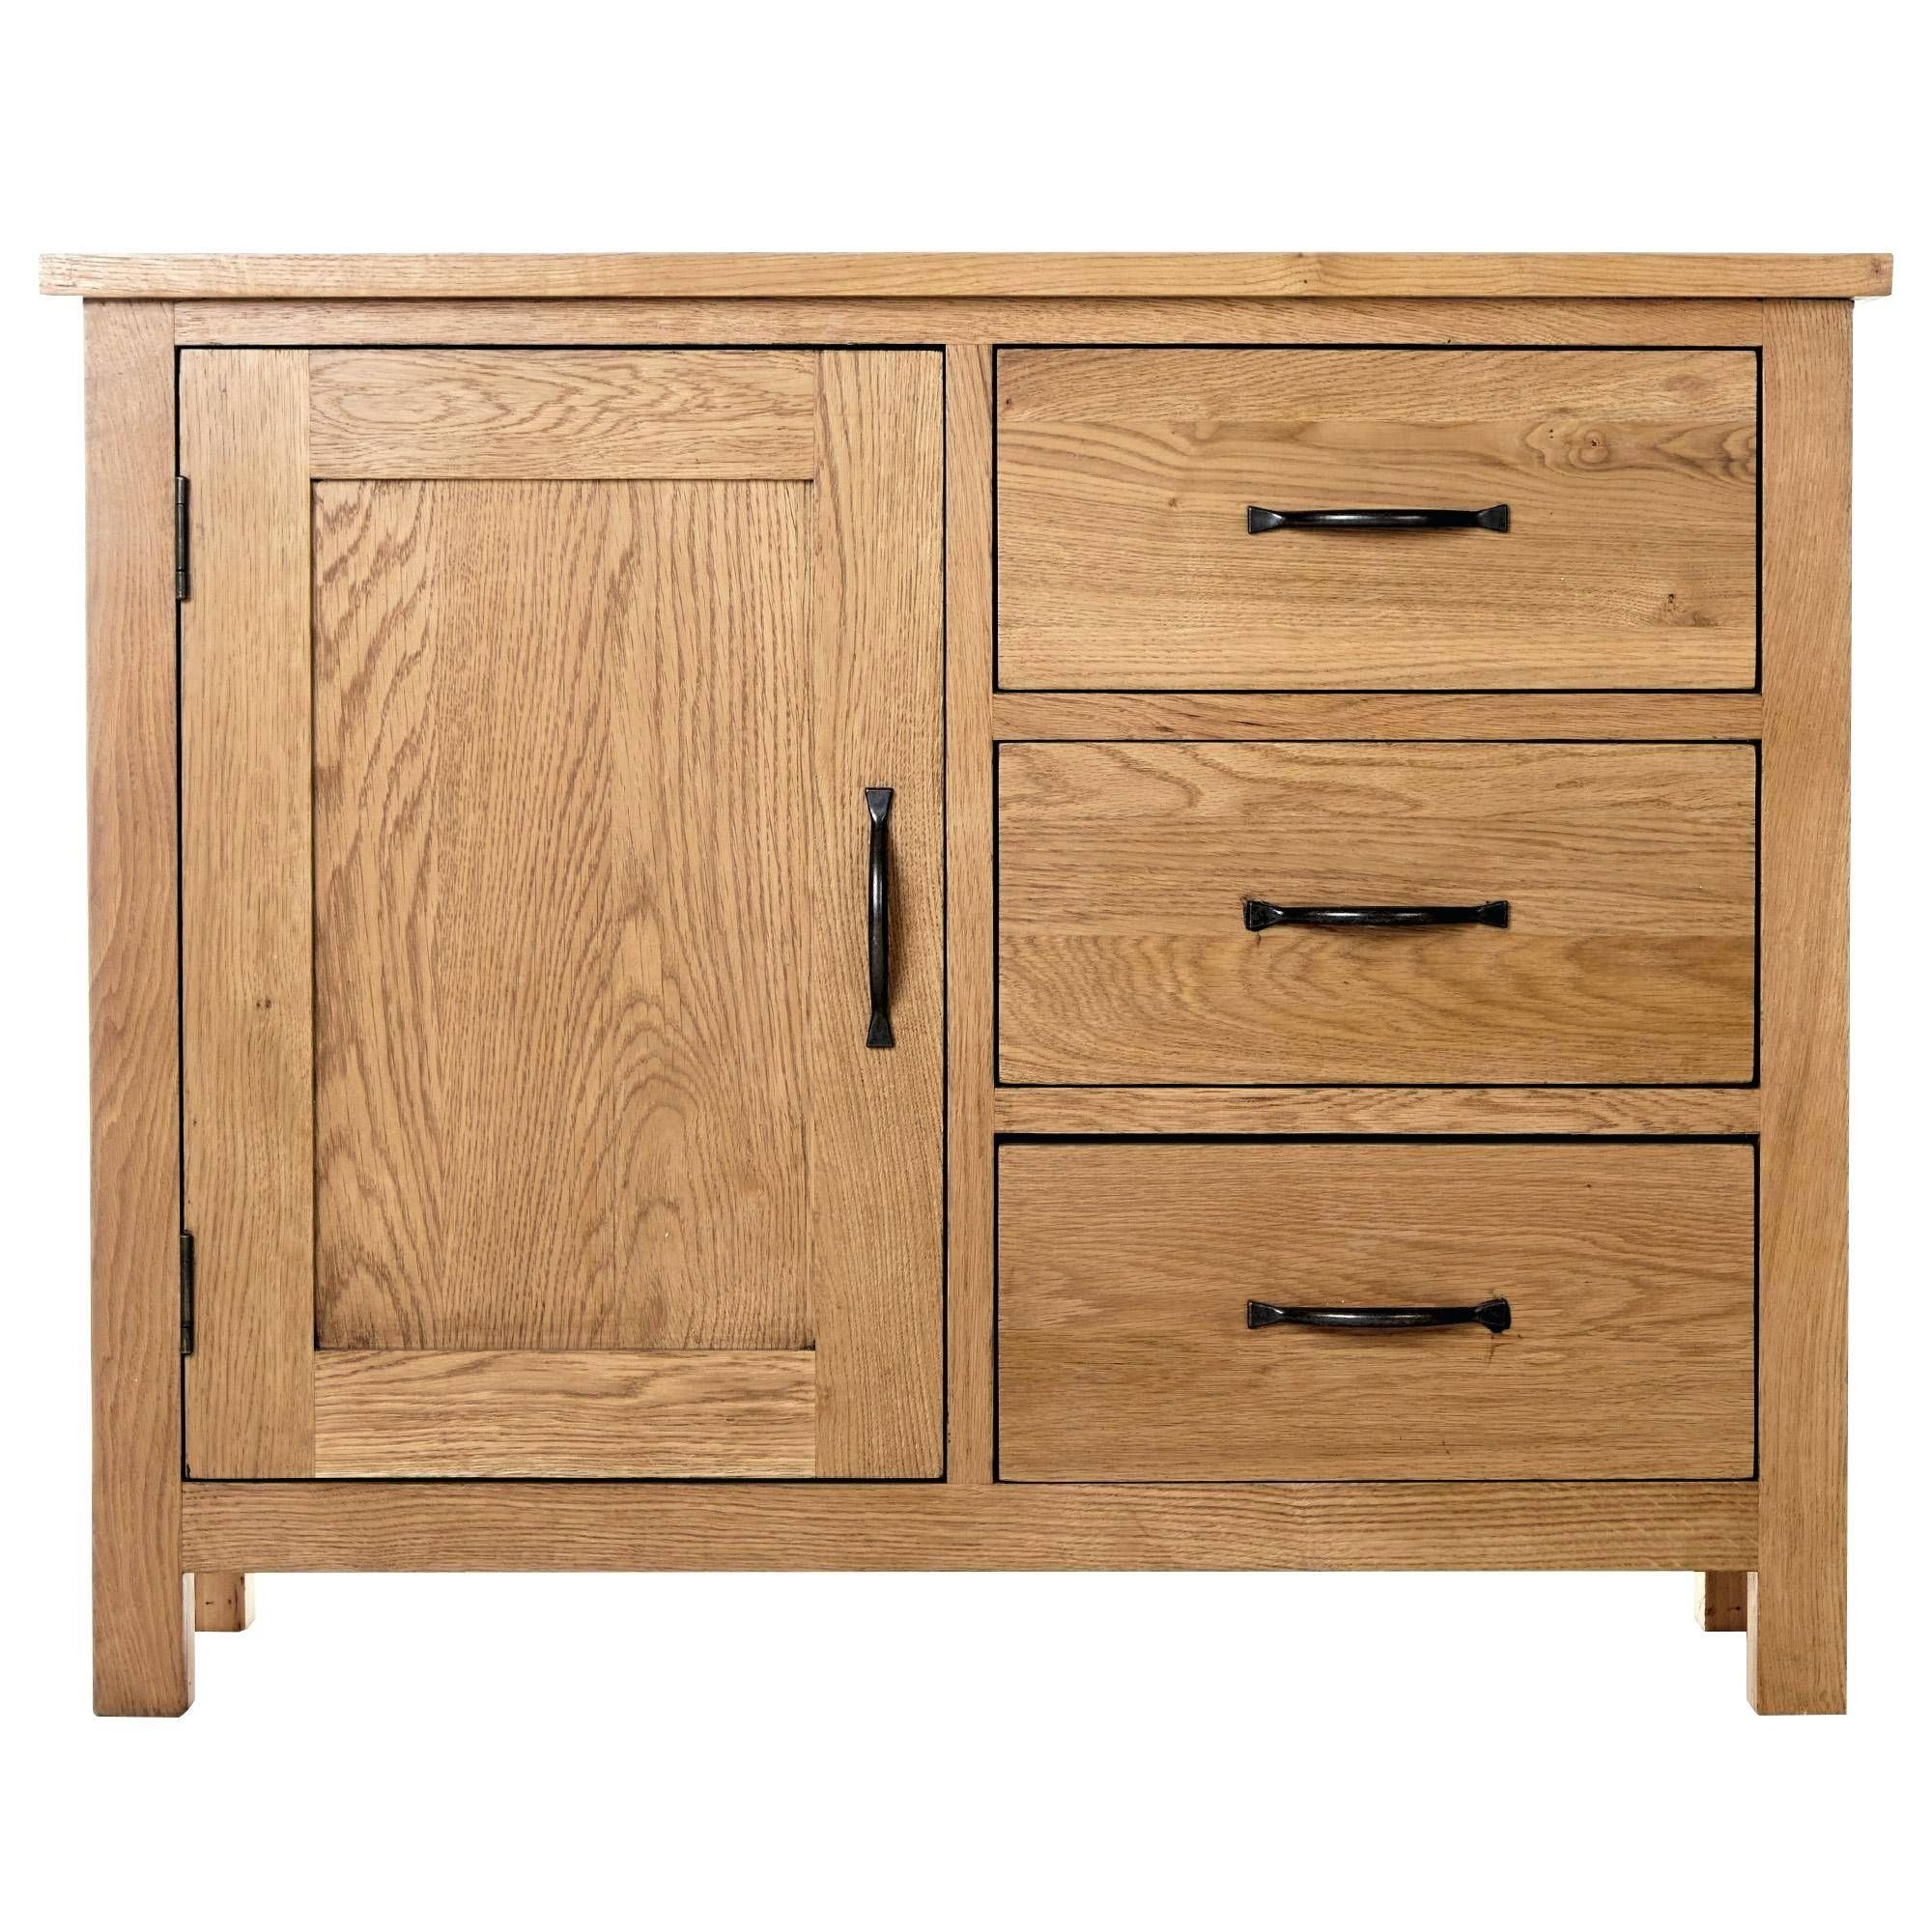 Wooden Sideboards Oak Sideboards Uk Only – Roborob (View 3 of 15)